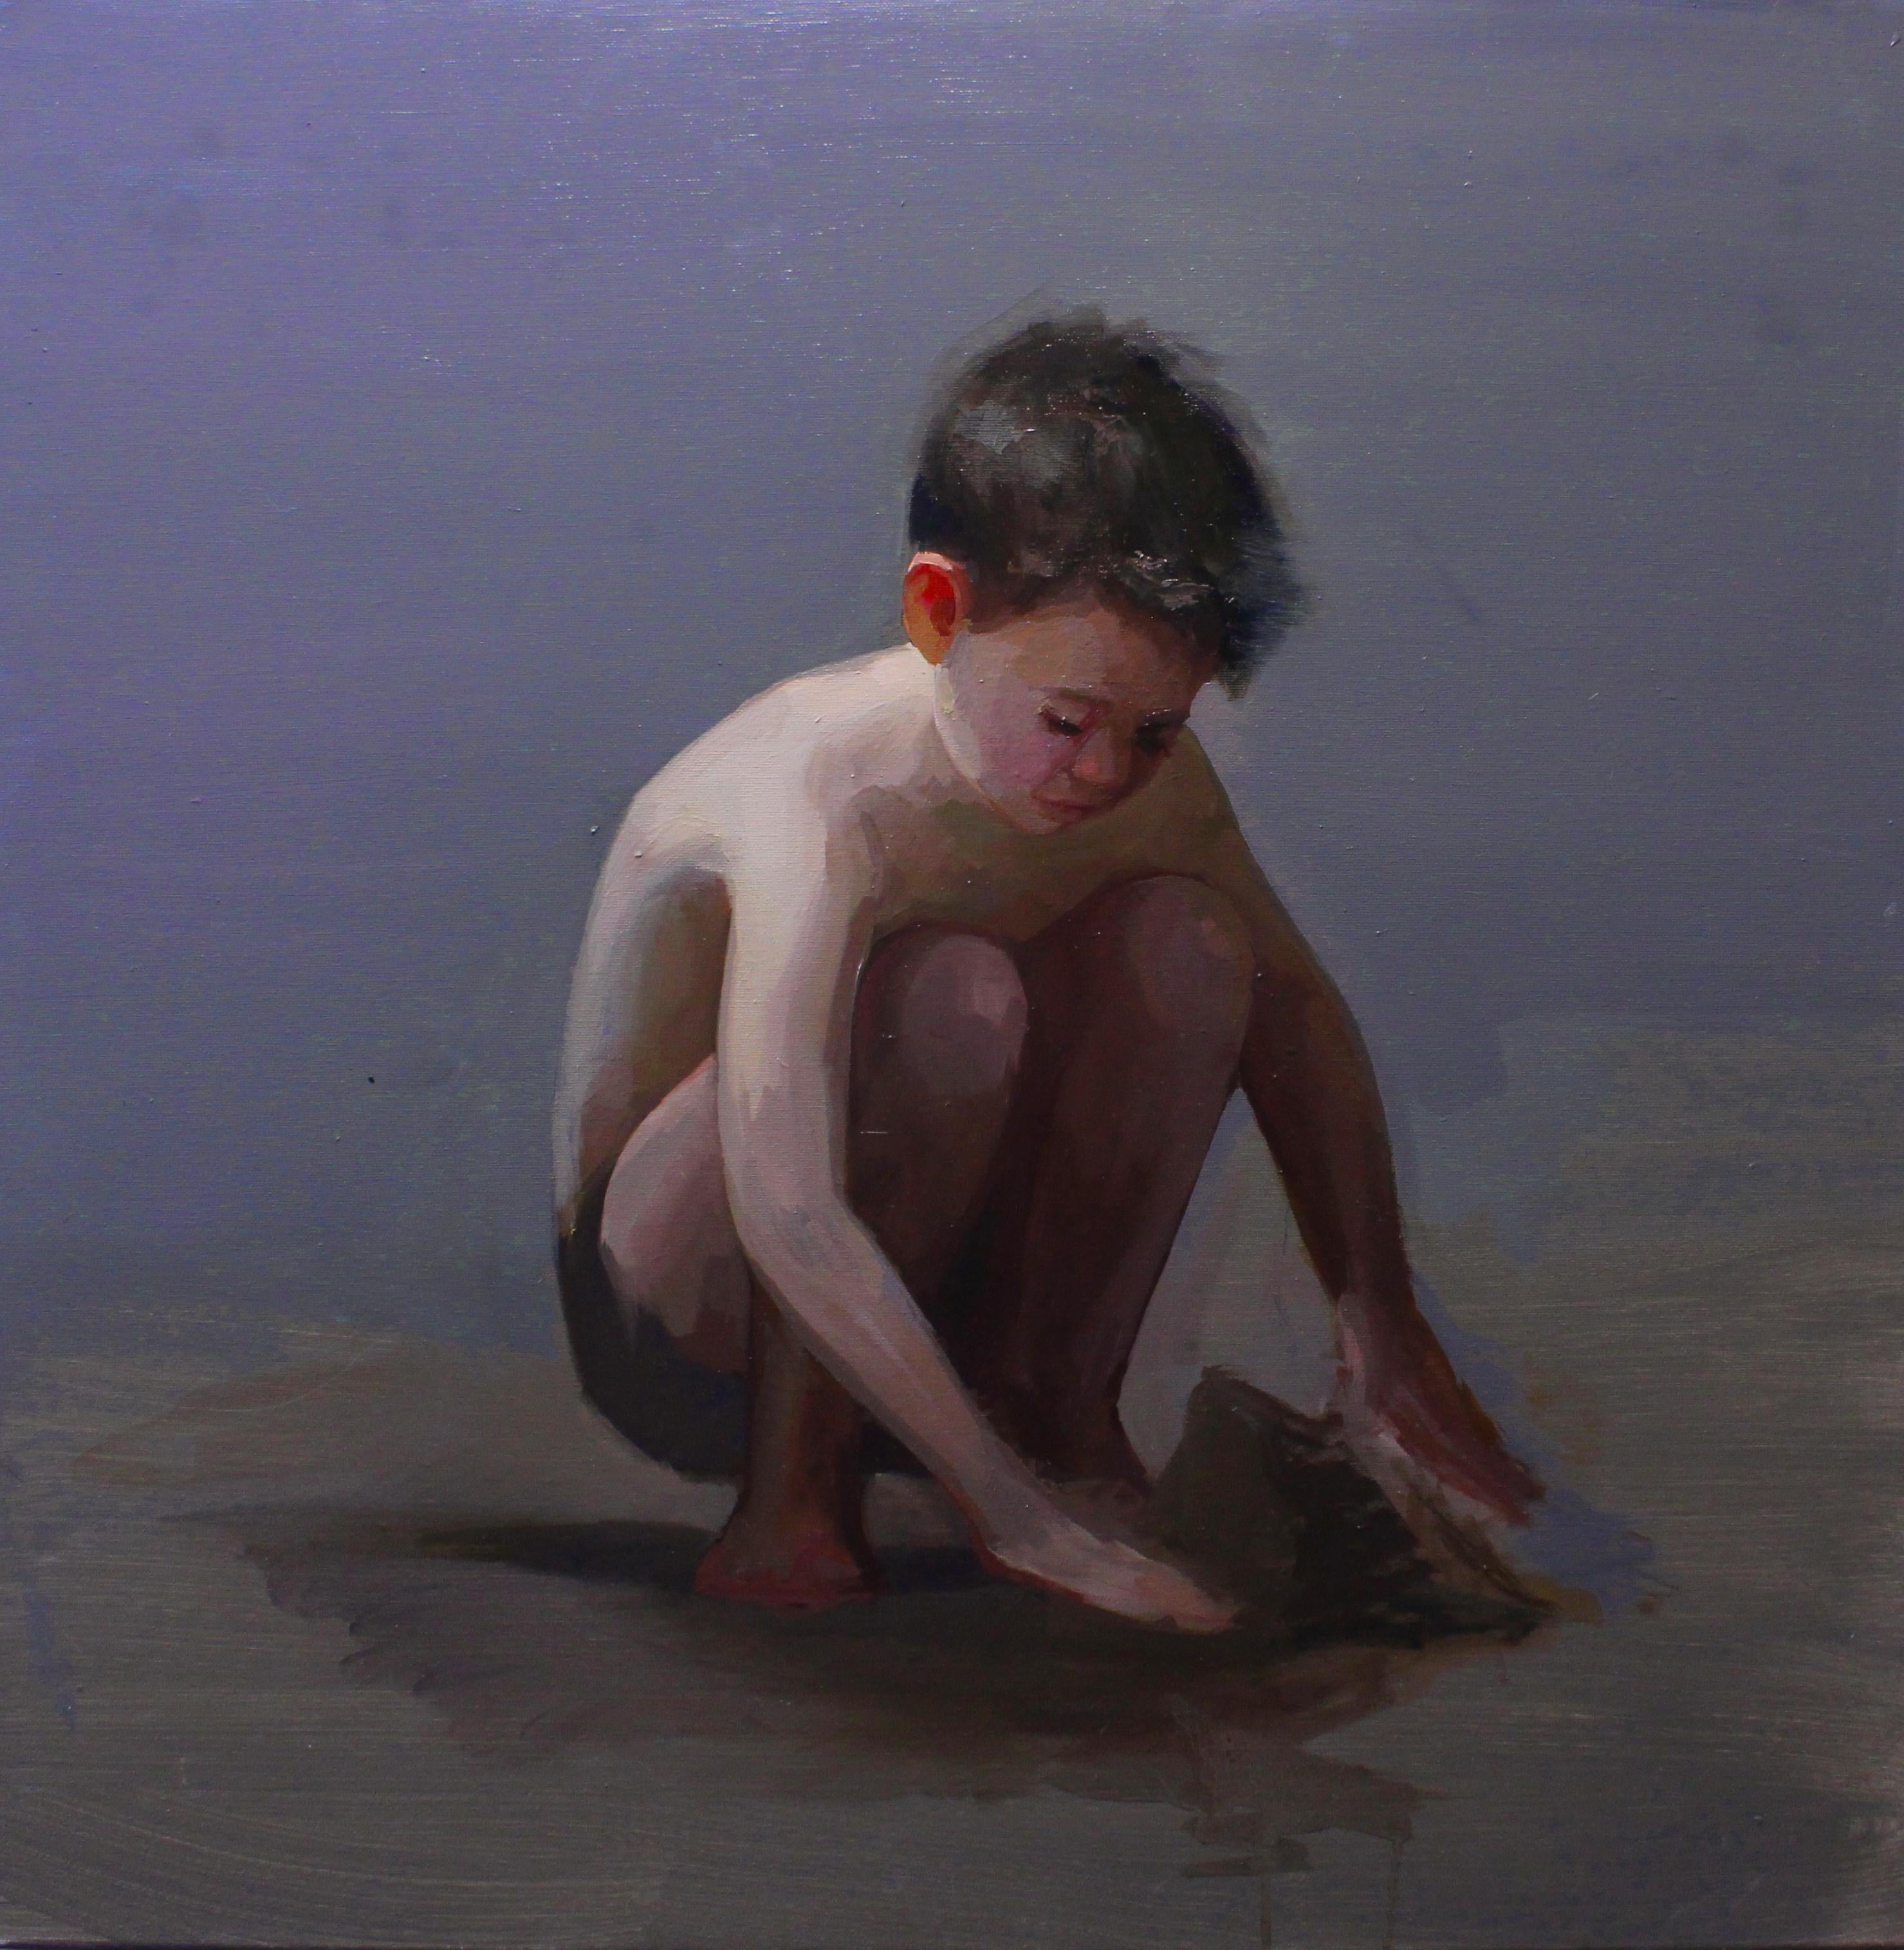 Beach Day II- 21st Century Contemporary Oil Painting of a young Boy on the Beach